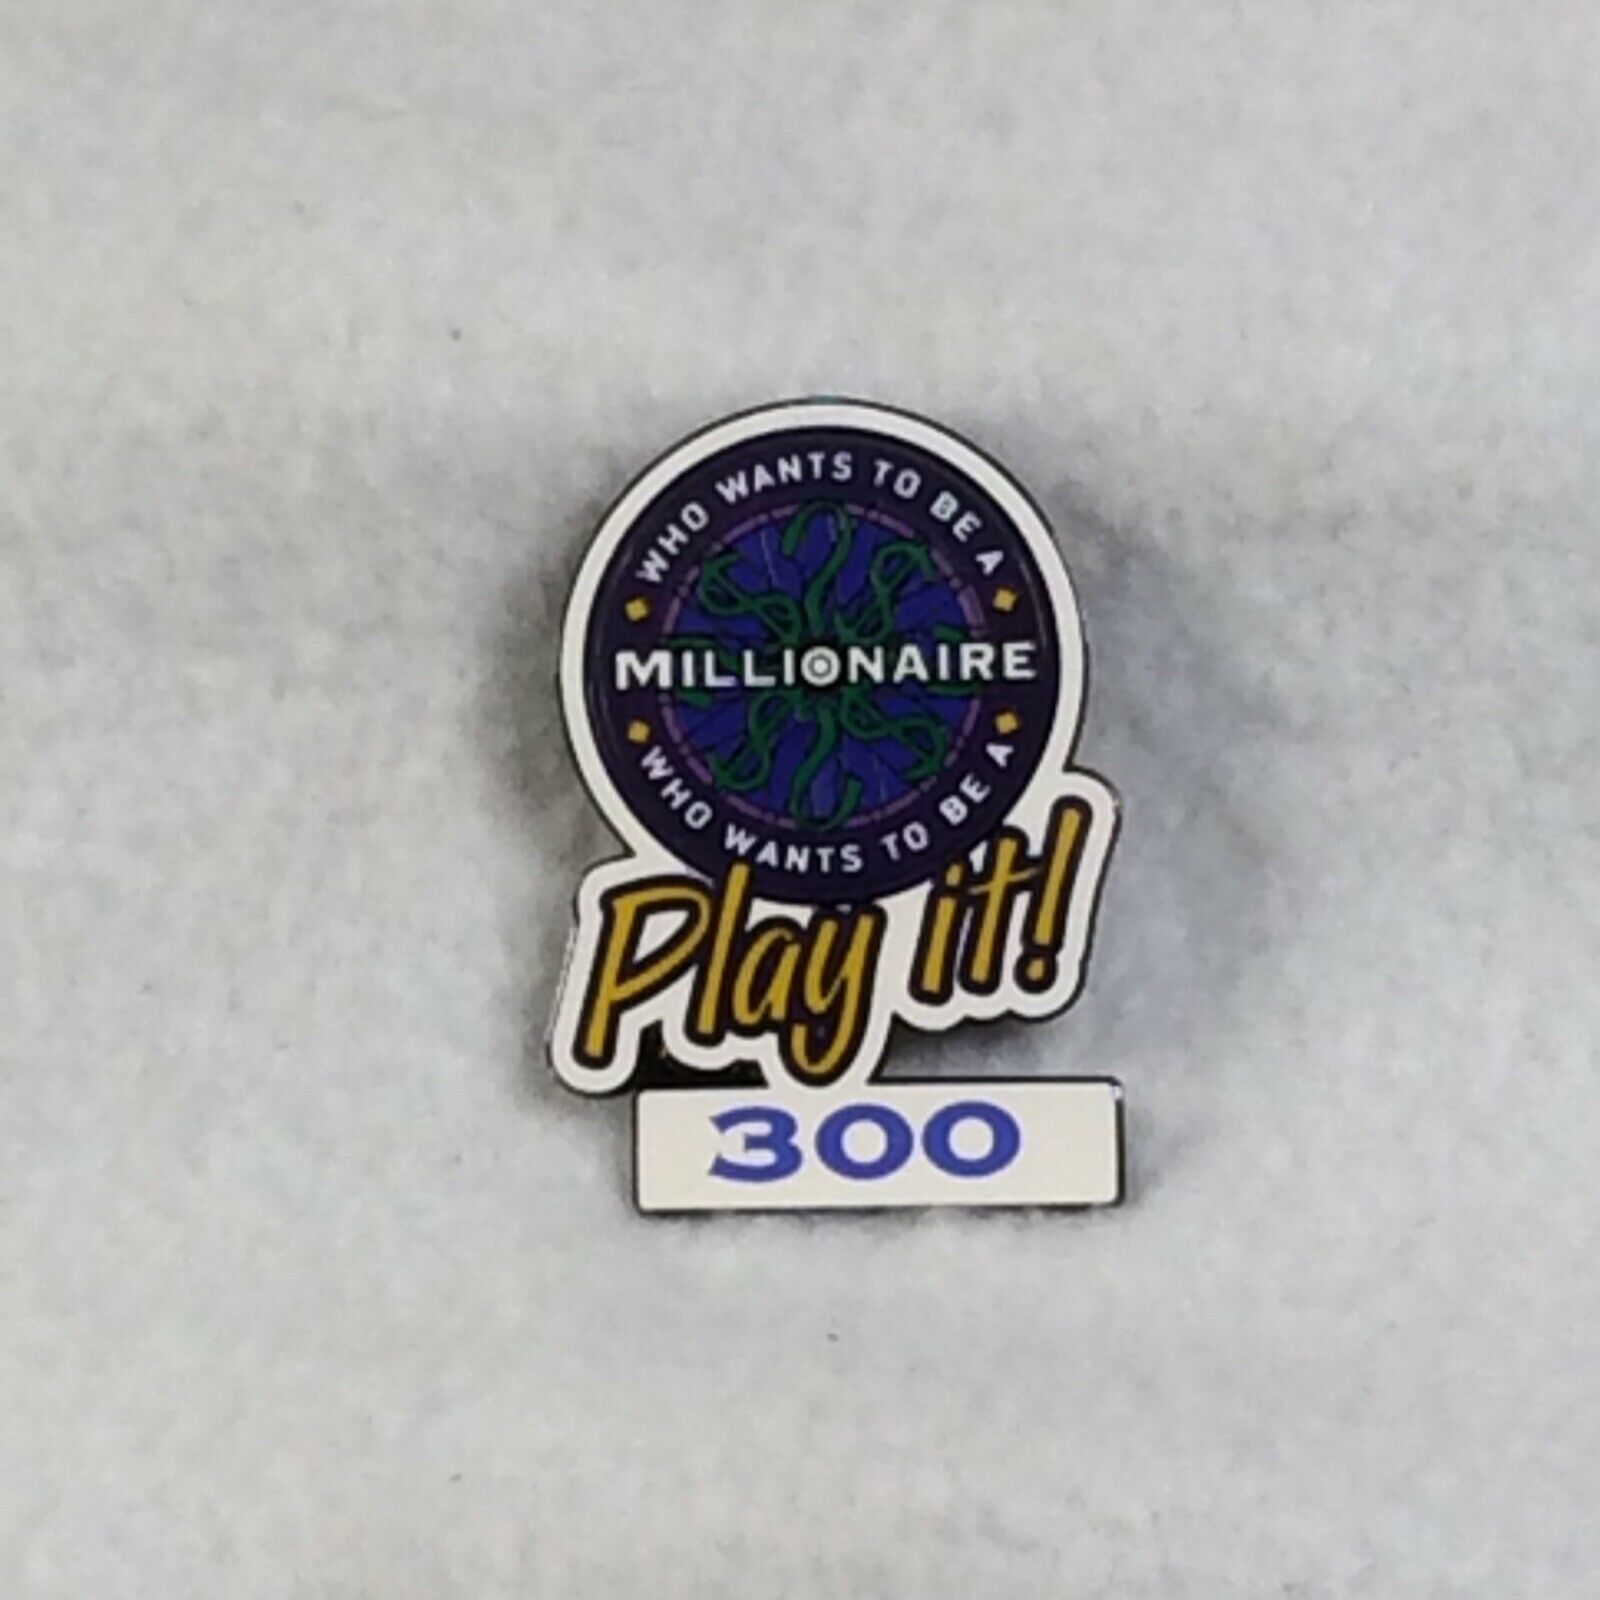 Disney Pins - Who Wants To Be A Millionaire